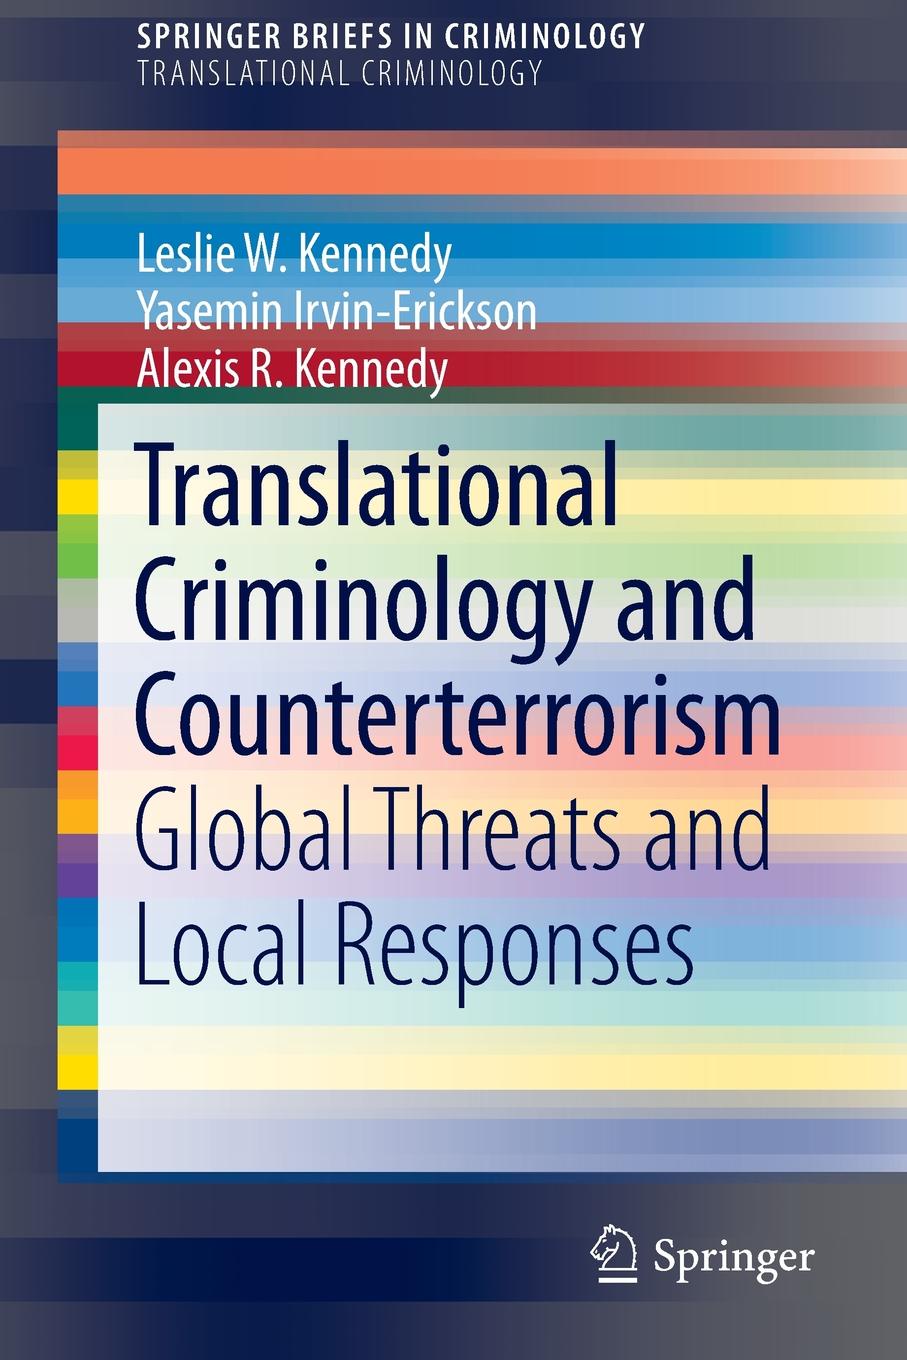 Translational Criminology and Counterterrorism. Global Threats and Local Responses